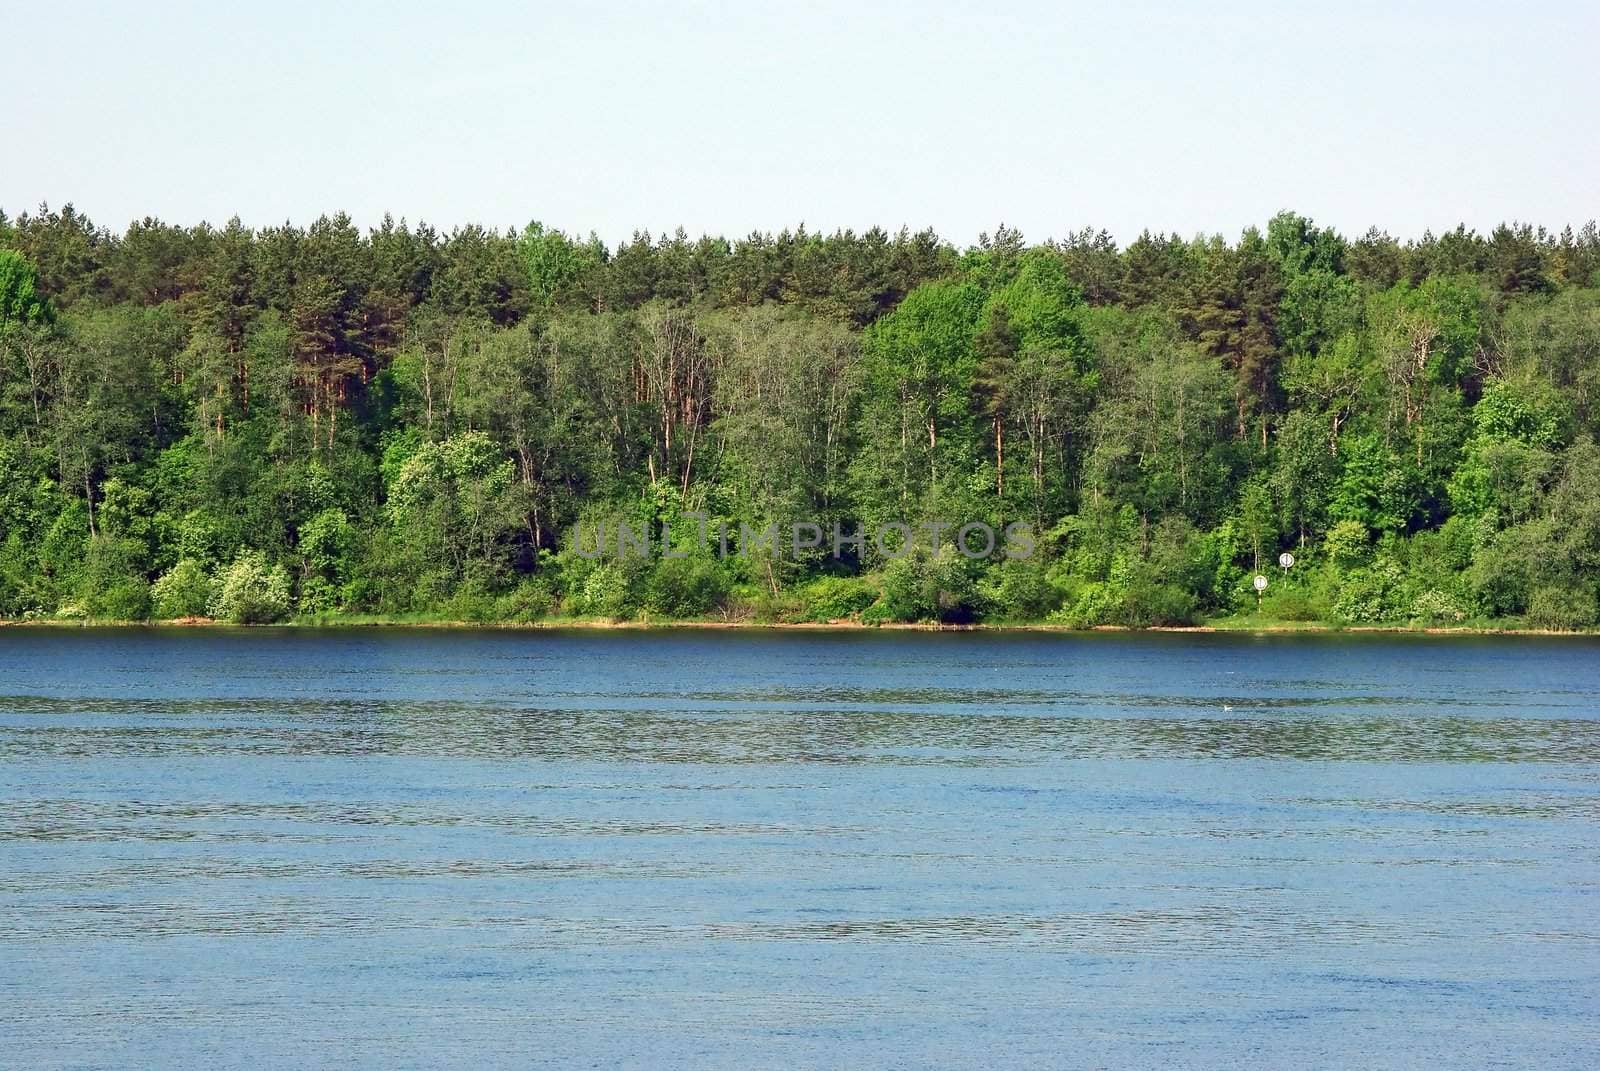 Summer landscape with river bank and forest